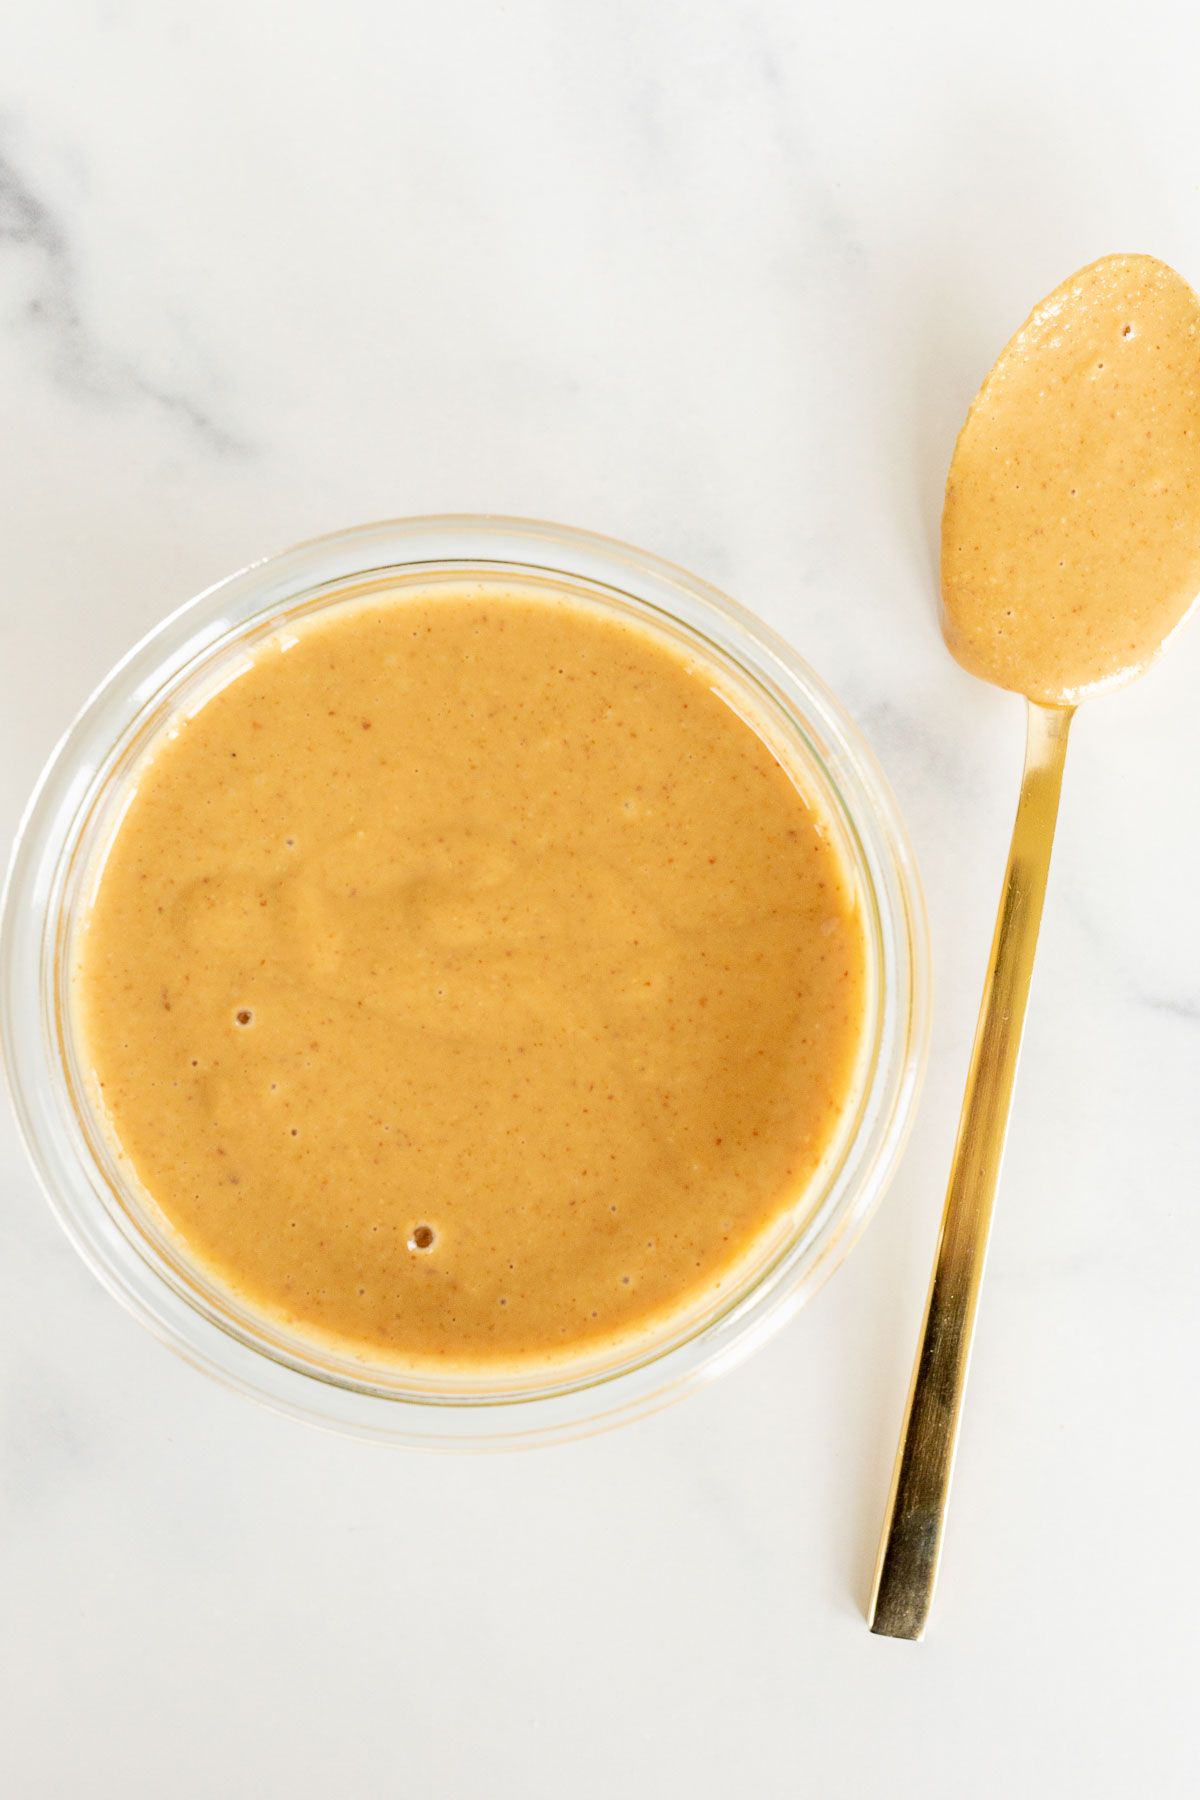 A small glass jar of homemade peanut butter on a marble surface, gold spoon to the side.